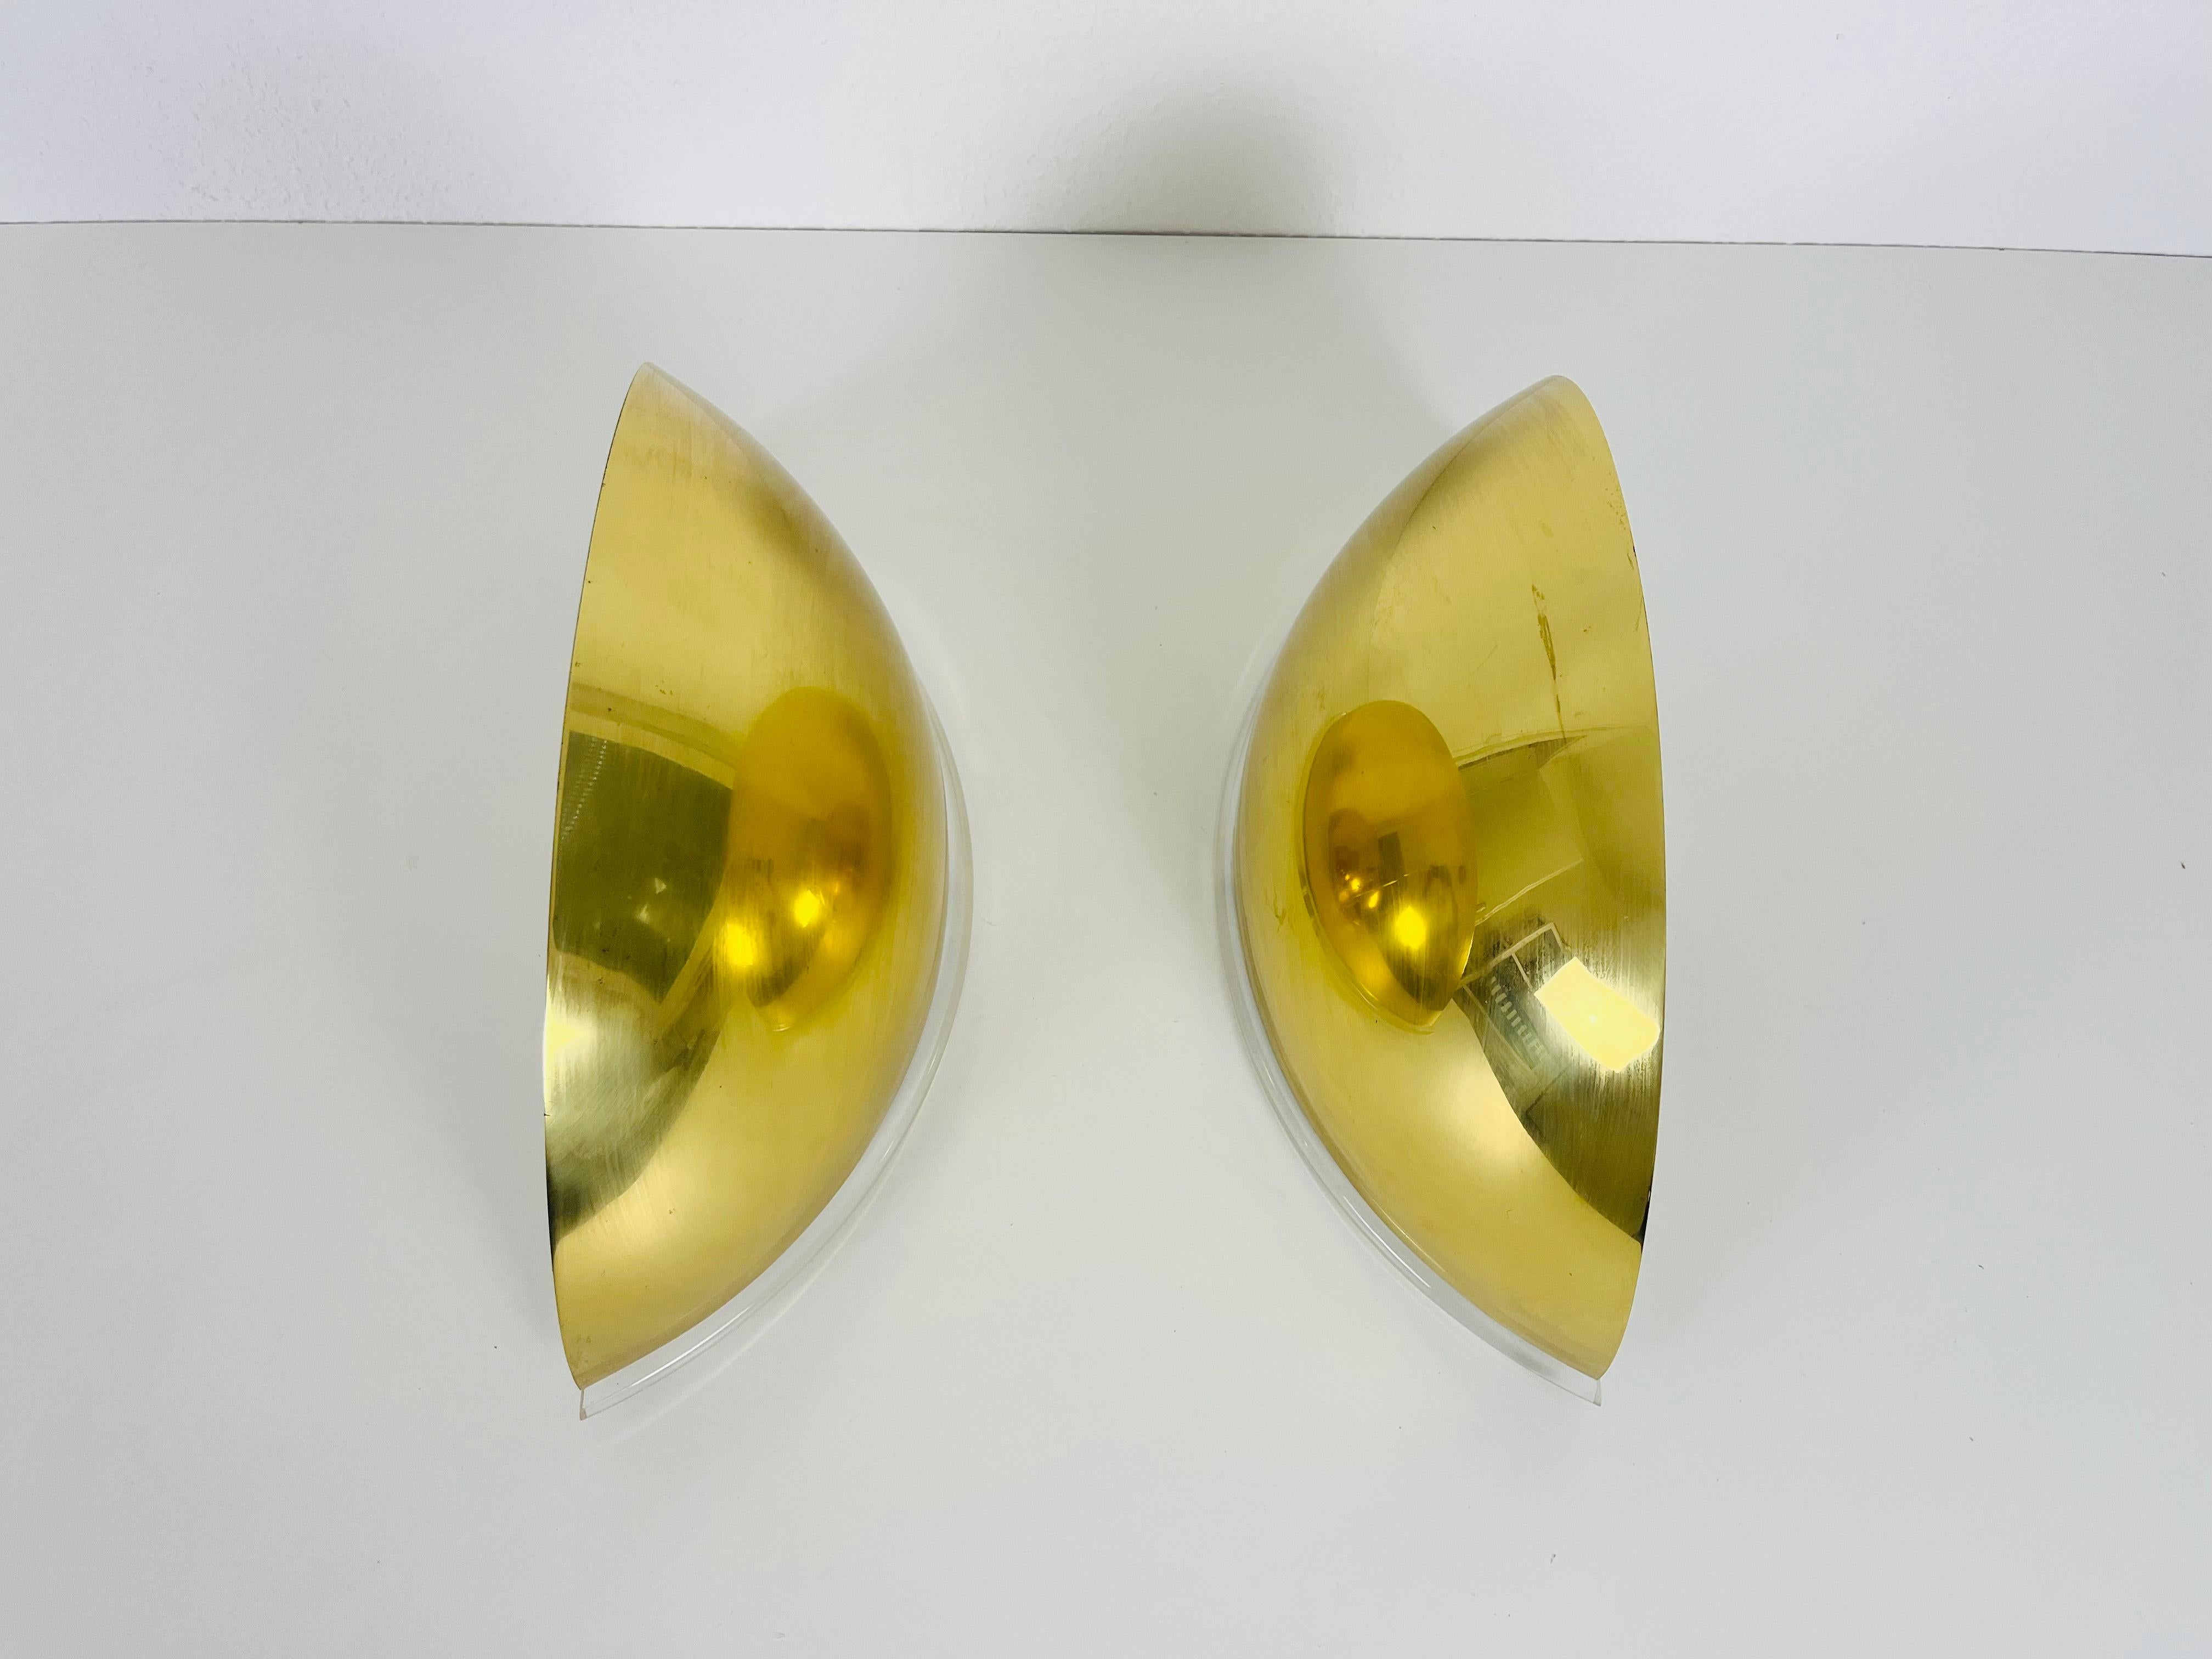 Pair of Florian Schulz Midcentury Brass Wall Lamps, 1970s In Good Condition For Sale In Hagenbach, DE